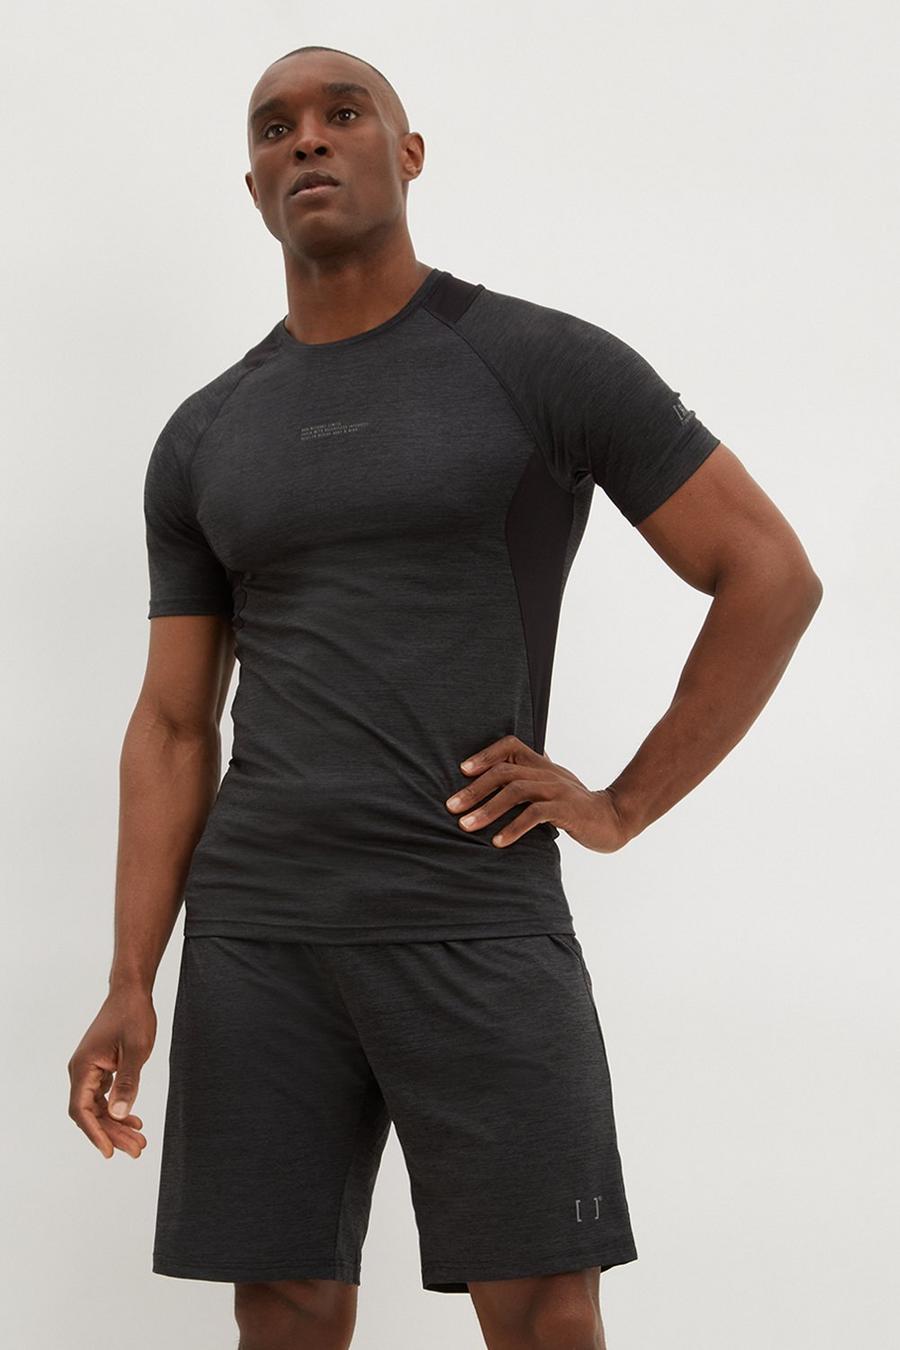 RTR Muscle Fit Mesh T-Shirt